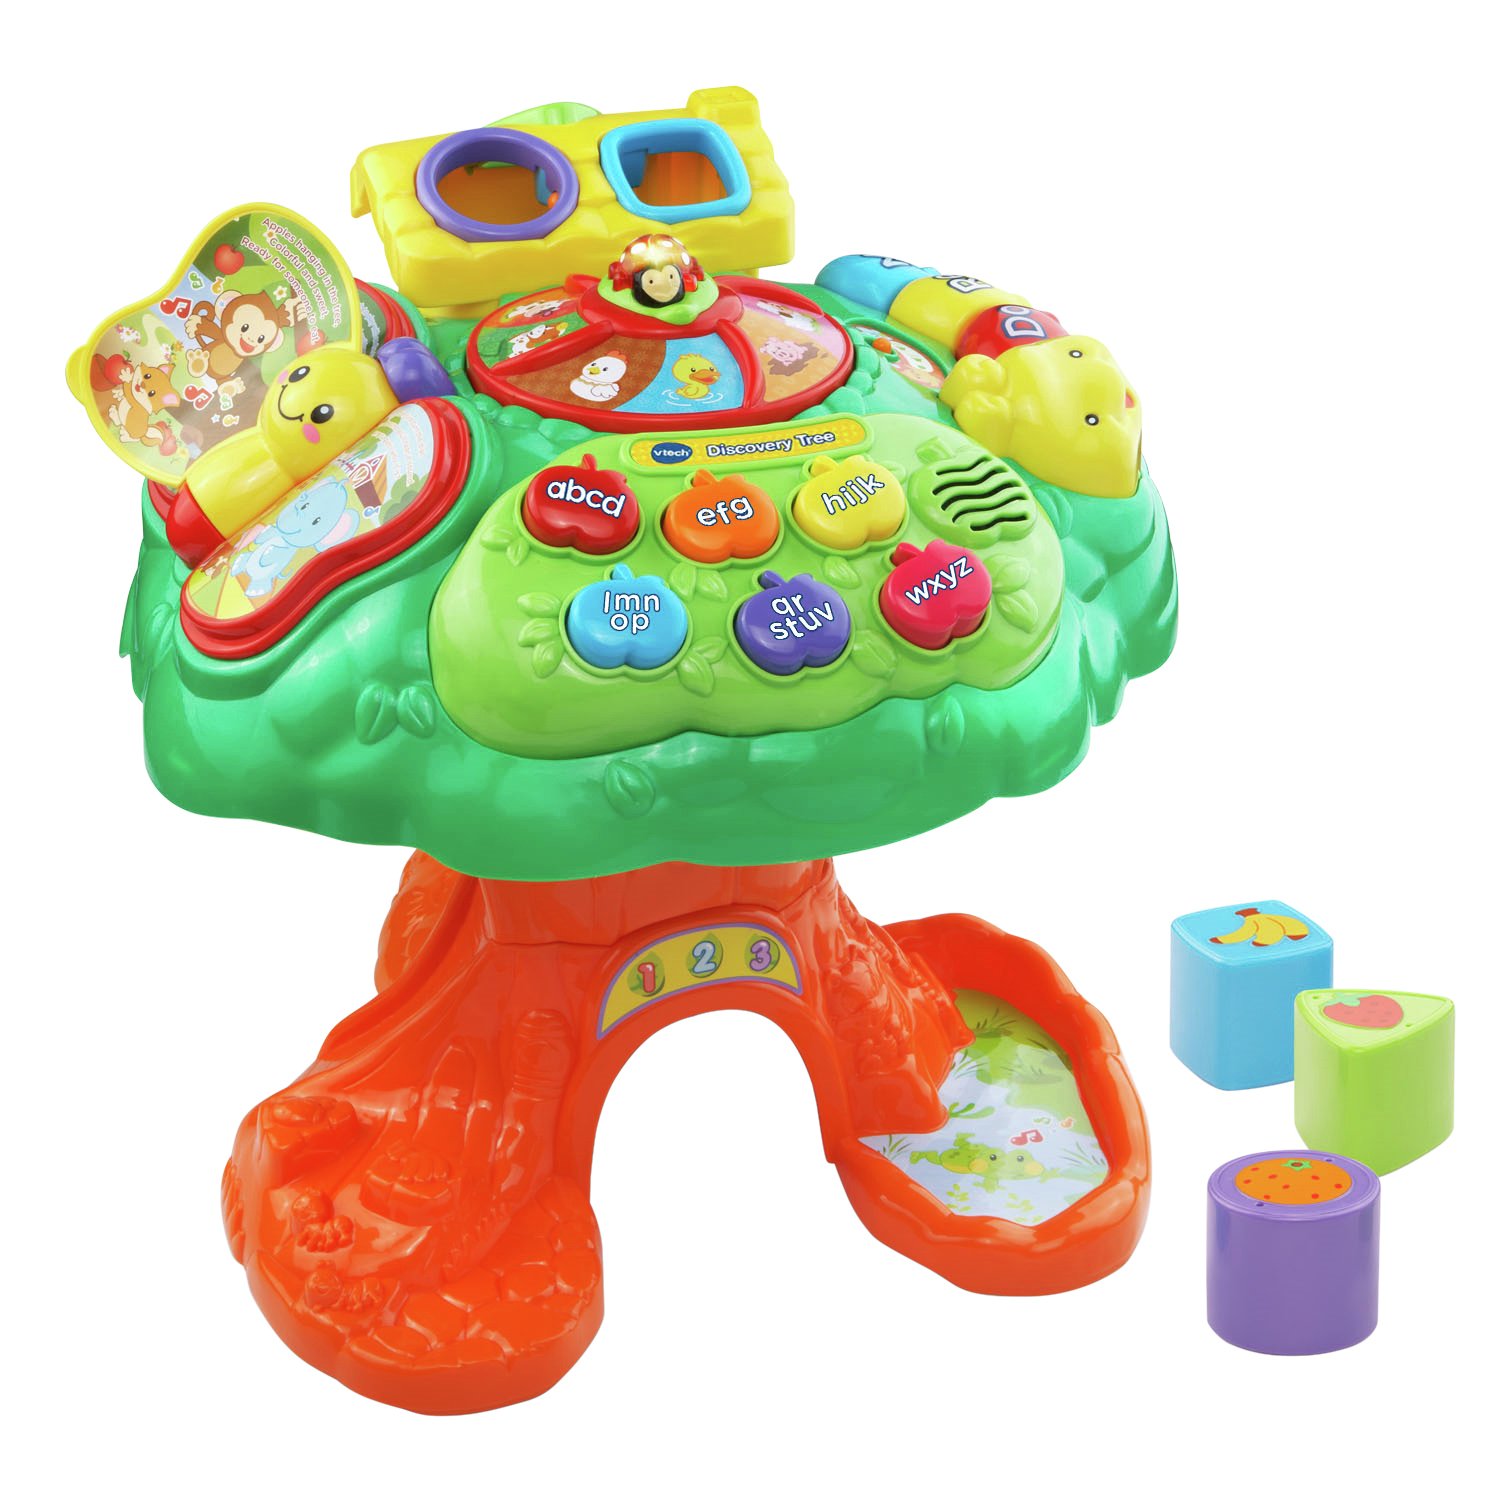 VTech Discovery Tree Review